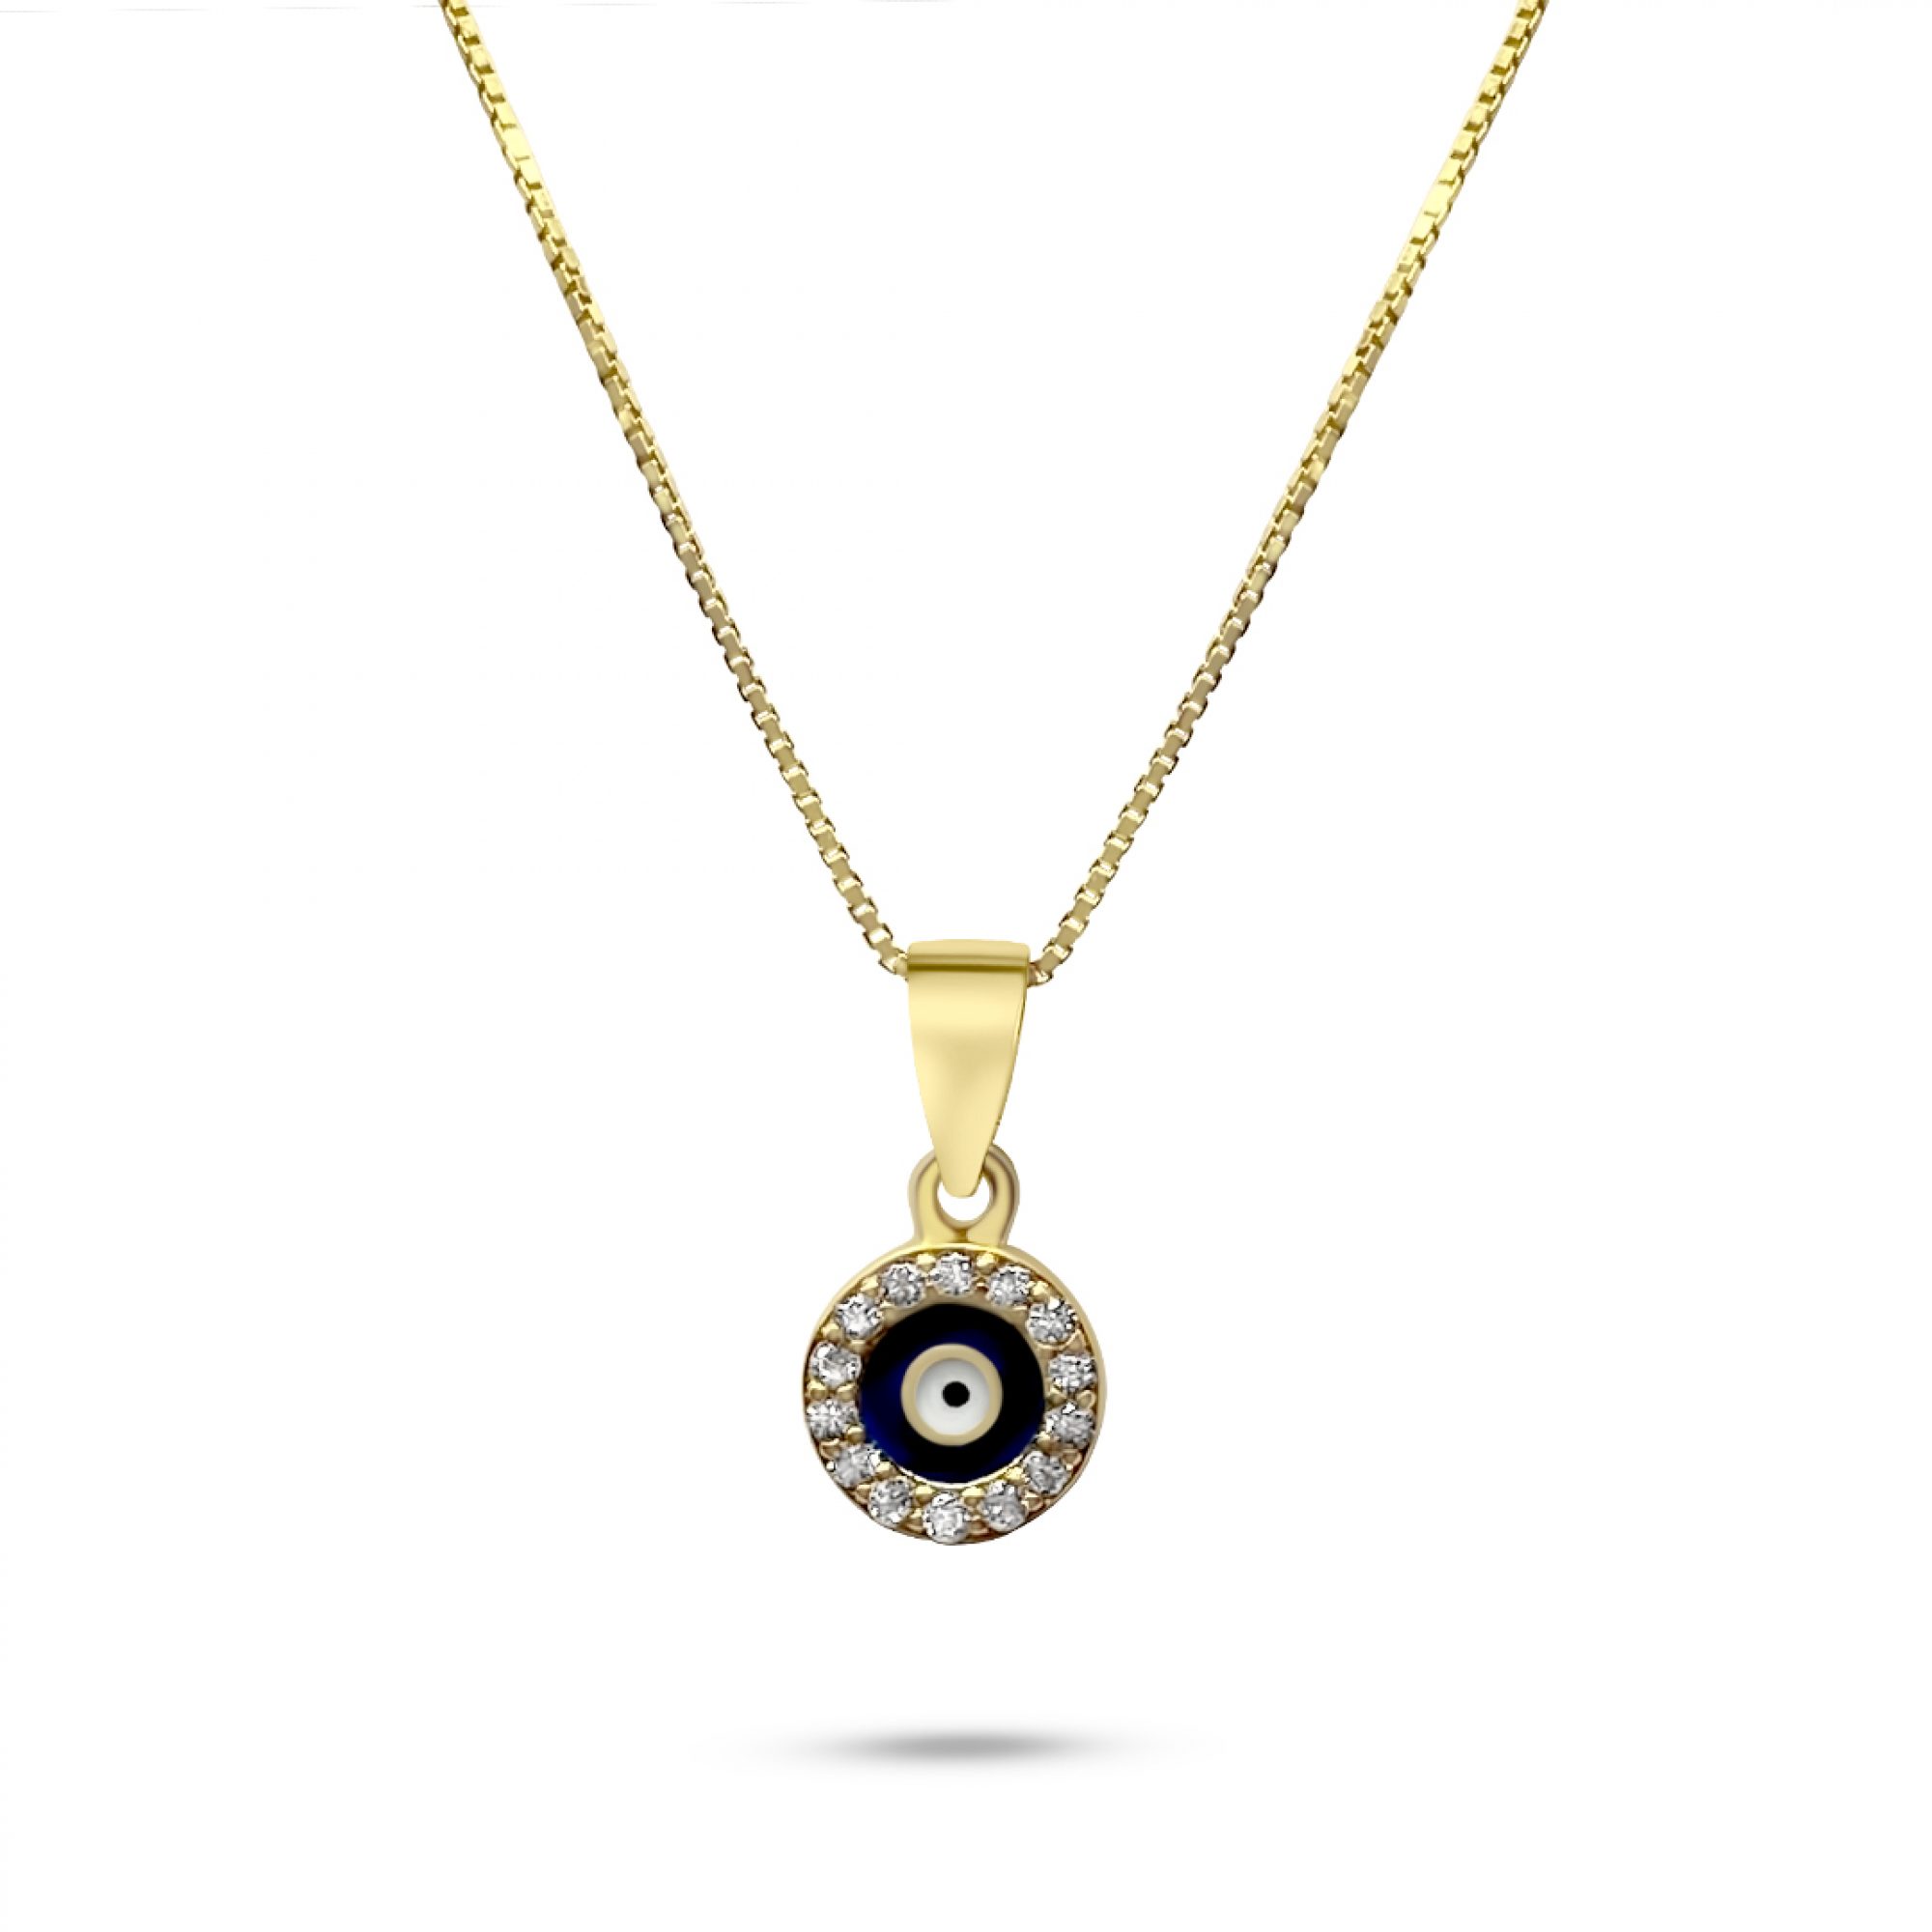 Gold plated eye pendant necklace with zircon stones